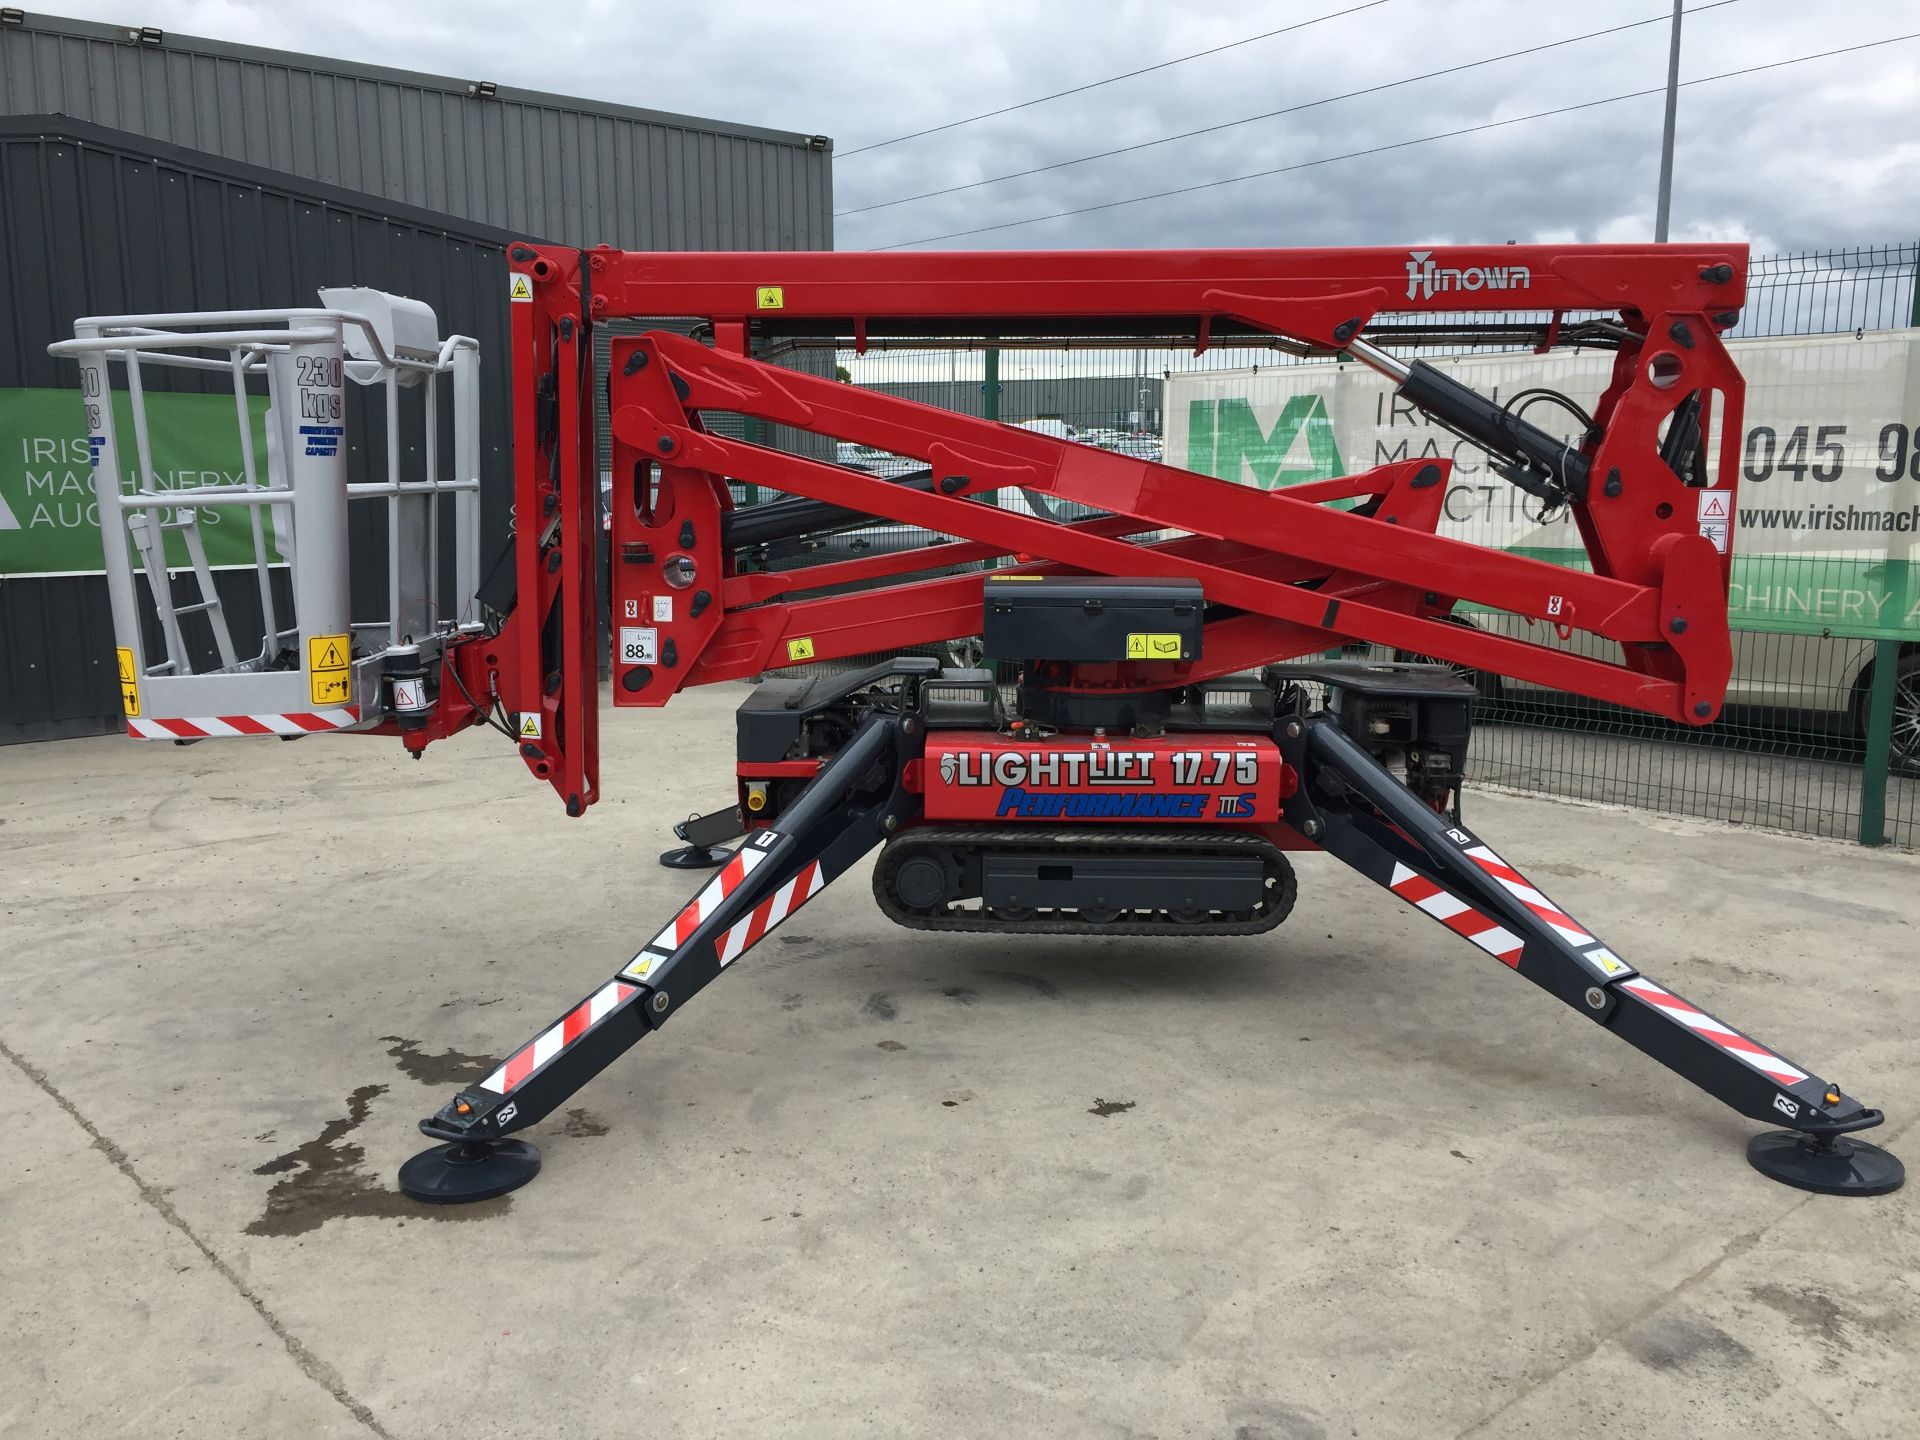 PL-14631 2012 Hinowa Lightlift 17.75 Performance Tracked Articulated Spider Boom Lift - Image 9 of 26